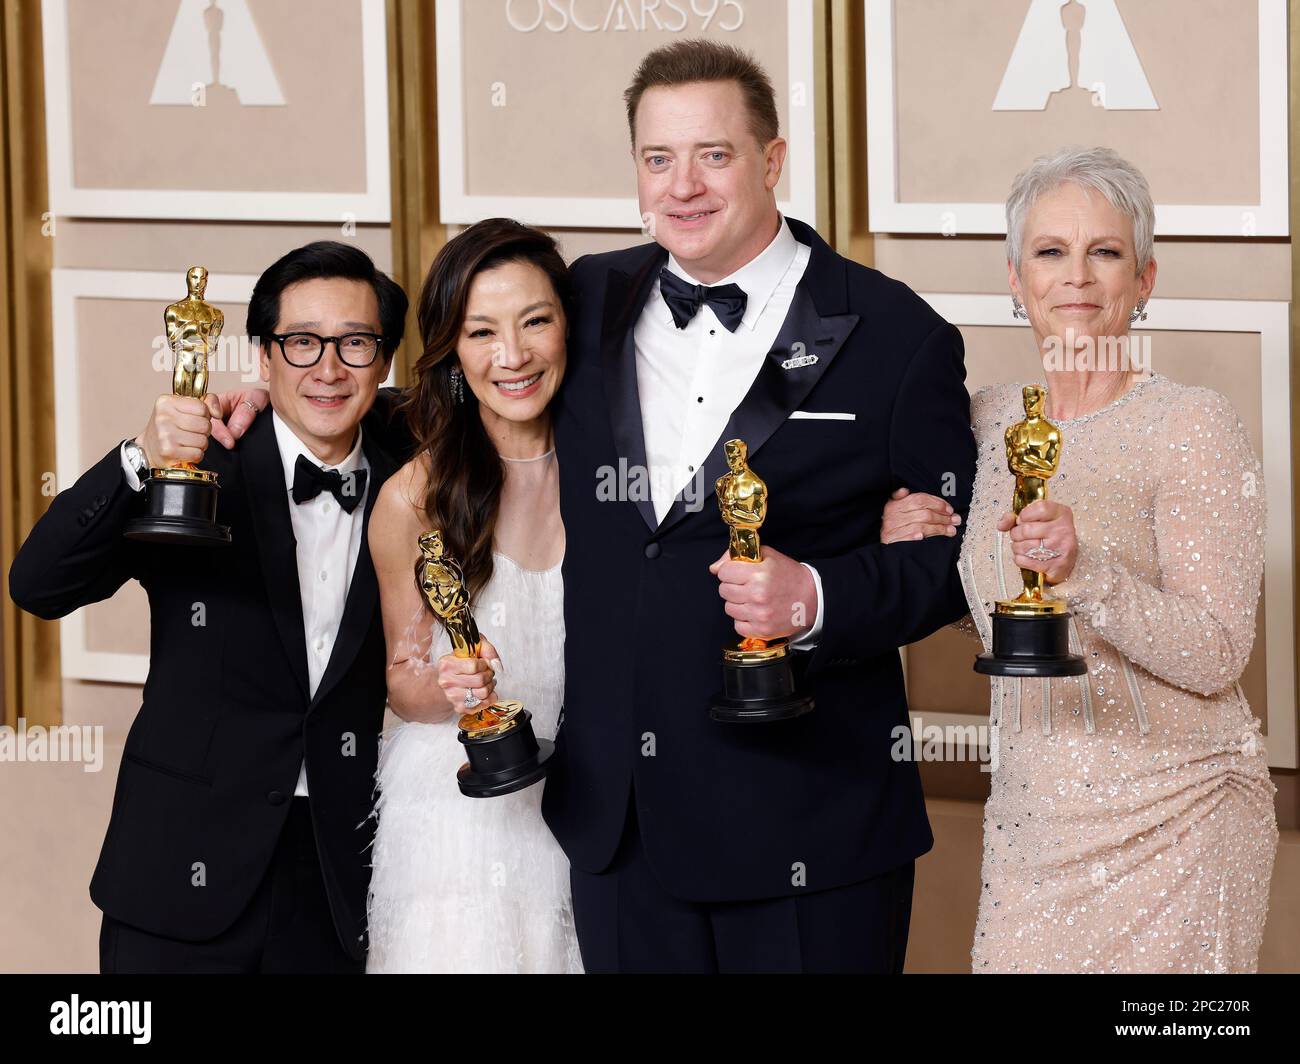 Brendan Fraser (second from R), winner of the award for Best Actor in a Leading Role for 'The Whale,' and (L-R) Ke Huy Quan, winner of the award for Best Actor In A Supporting Role, Michelle Yeoh, winner of the award for Best Actress in a Leading Role and Jamie Lee Curtis, winner of the award for Best Supporting Actress for 'Everything Everywhere All at Once,' appear backstage with their Oscars during the 95th annual Academy Awards at Loews Hollywood Hotel in the Hollywood section of Los Angeles on Sunday, March 12, 2023. Photo by John Angelillo/UPI Stock Photo